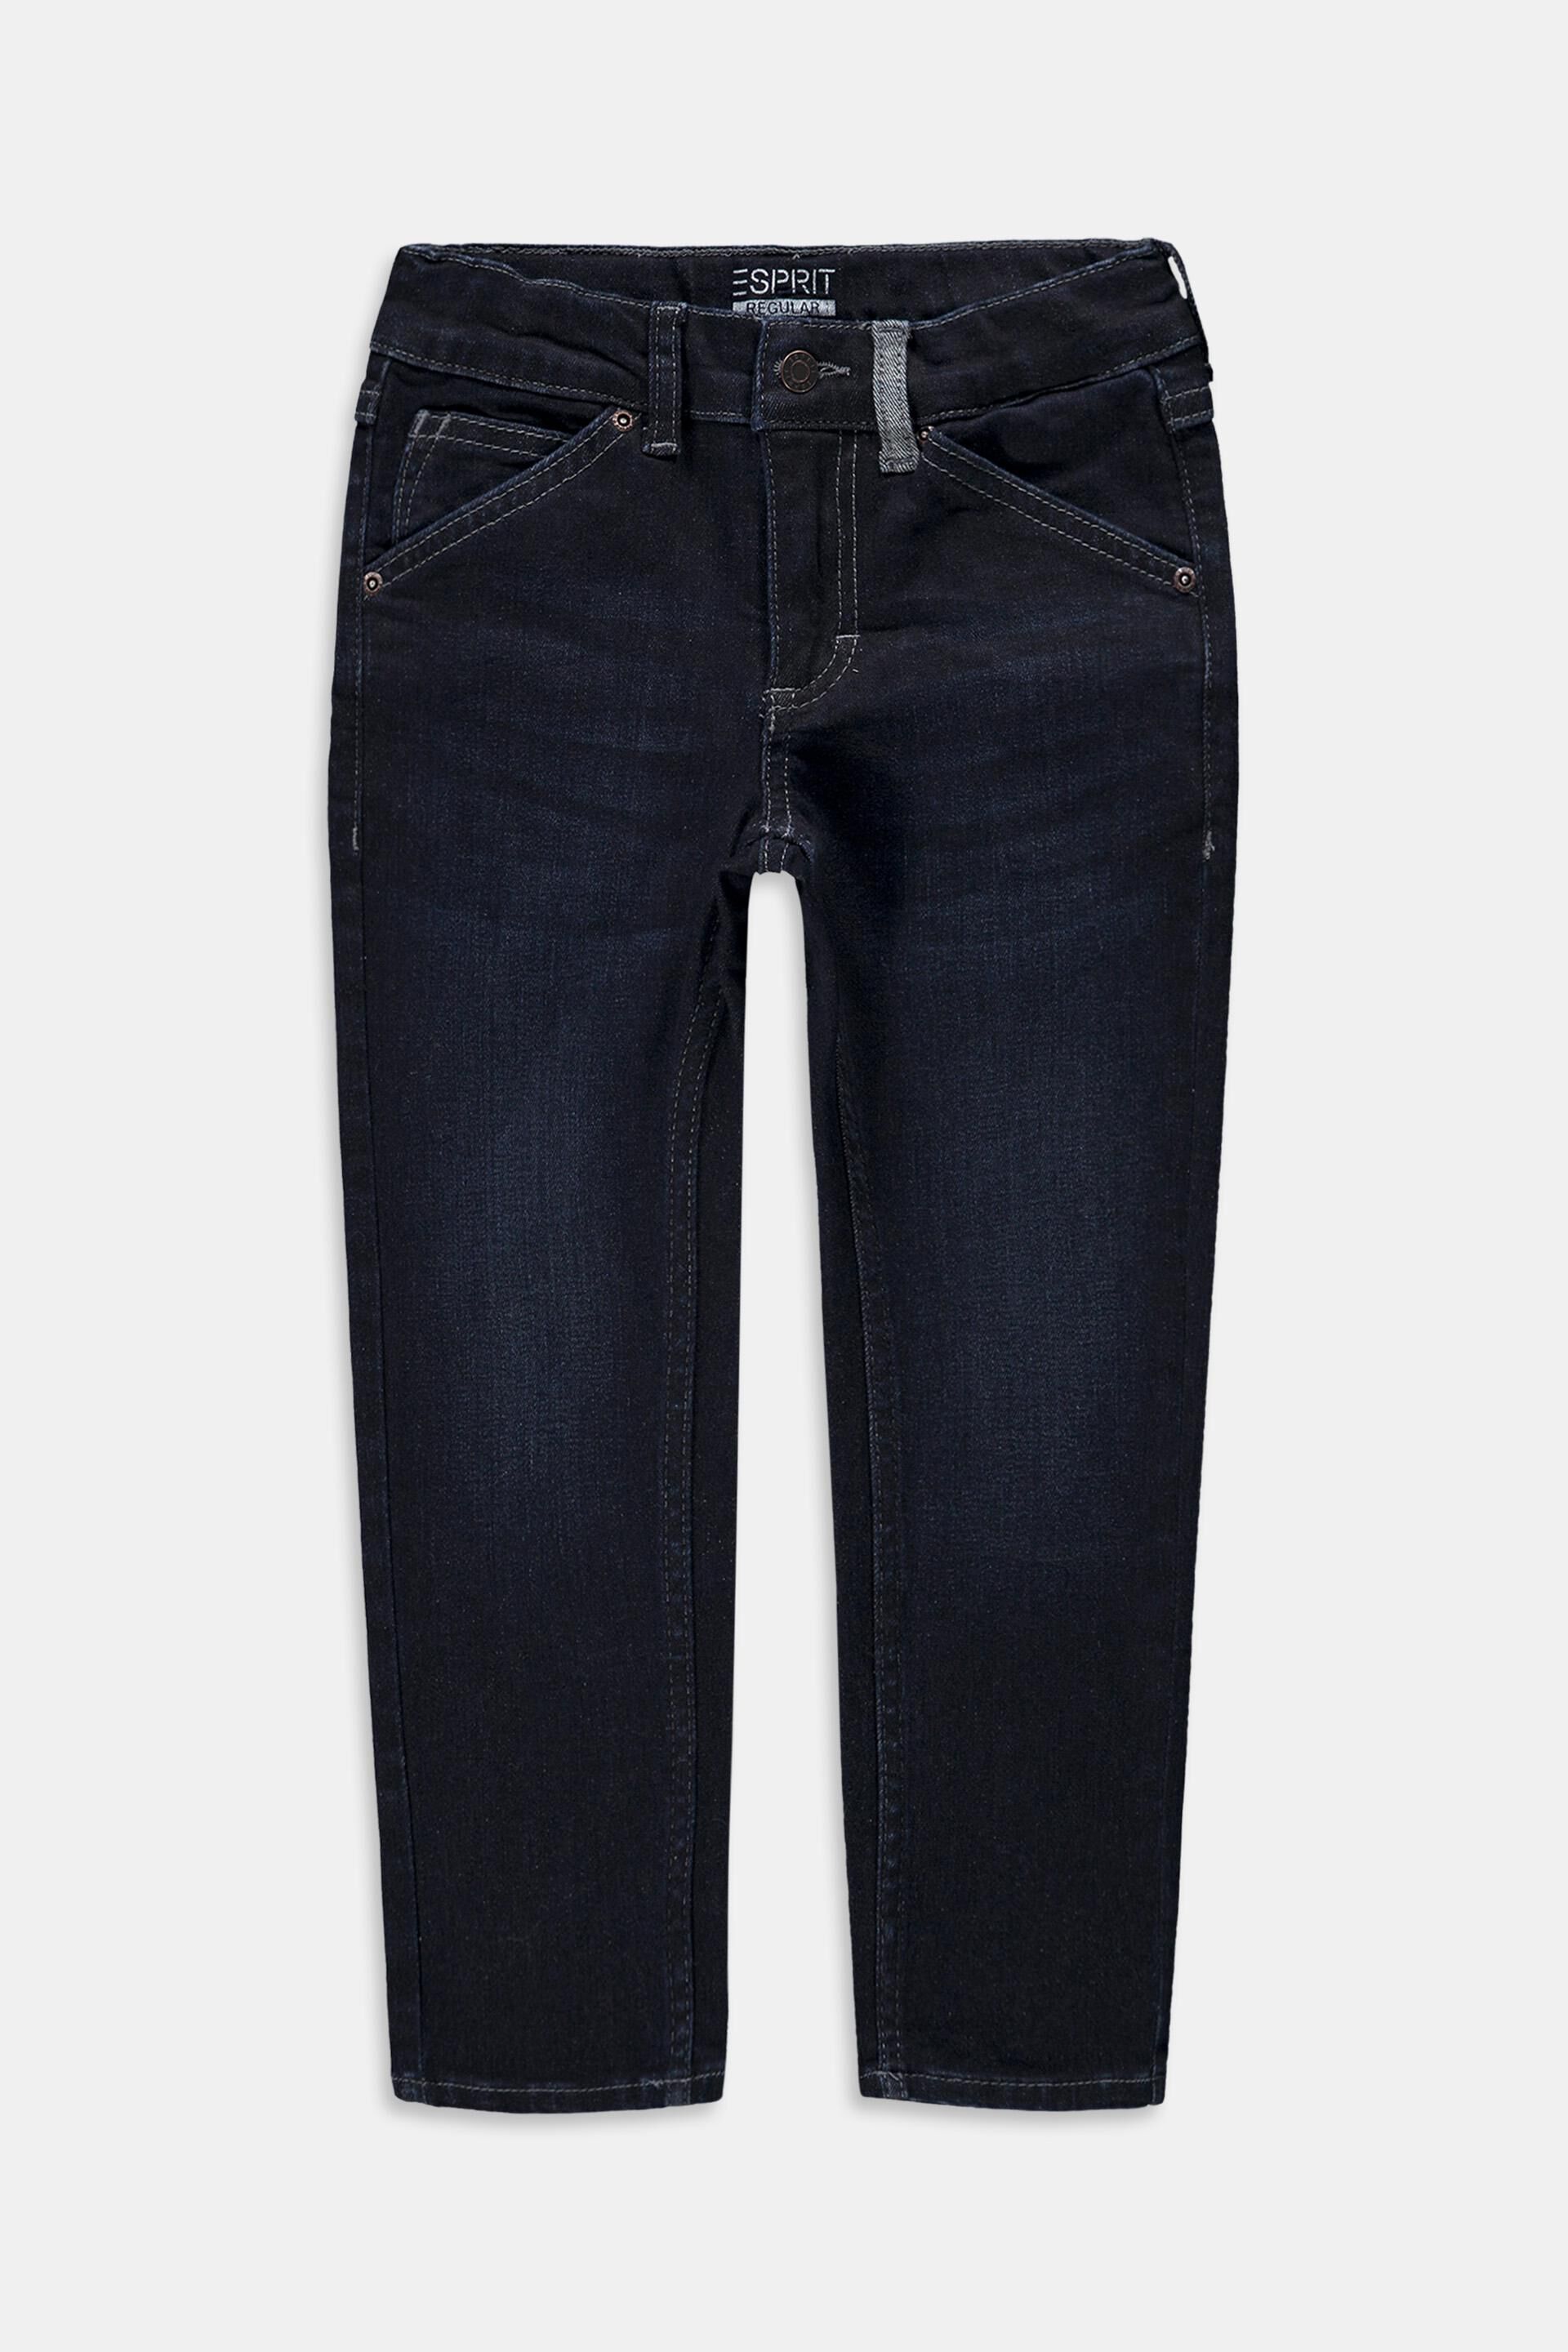 Esprit with Jeans adjustable waistband